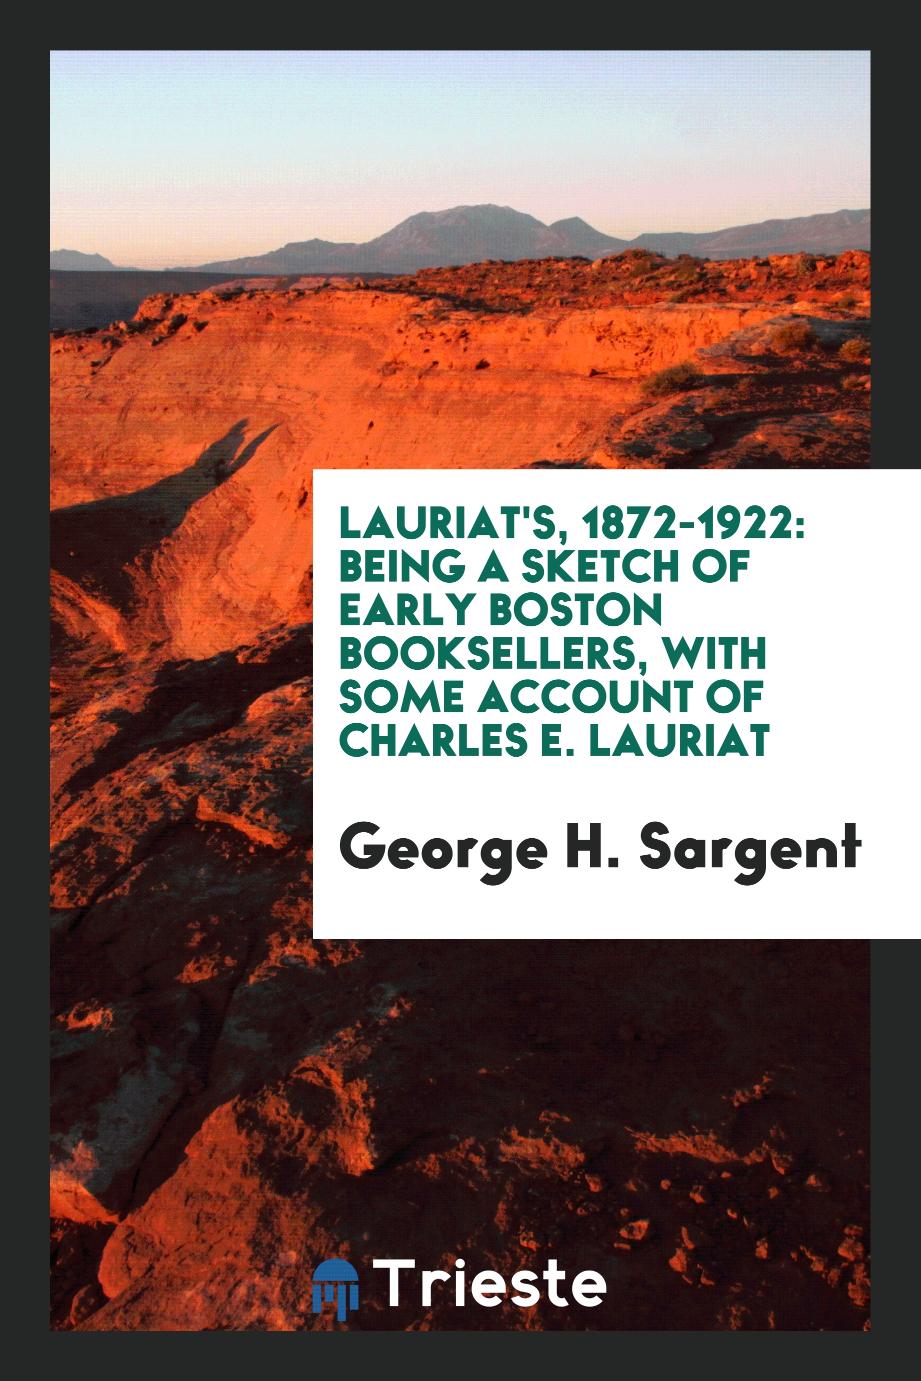 Lauriat's, 1872-1922: Being a Sketch of Early Boston Booksellers, with Some Account of Charles E. Lauriat